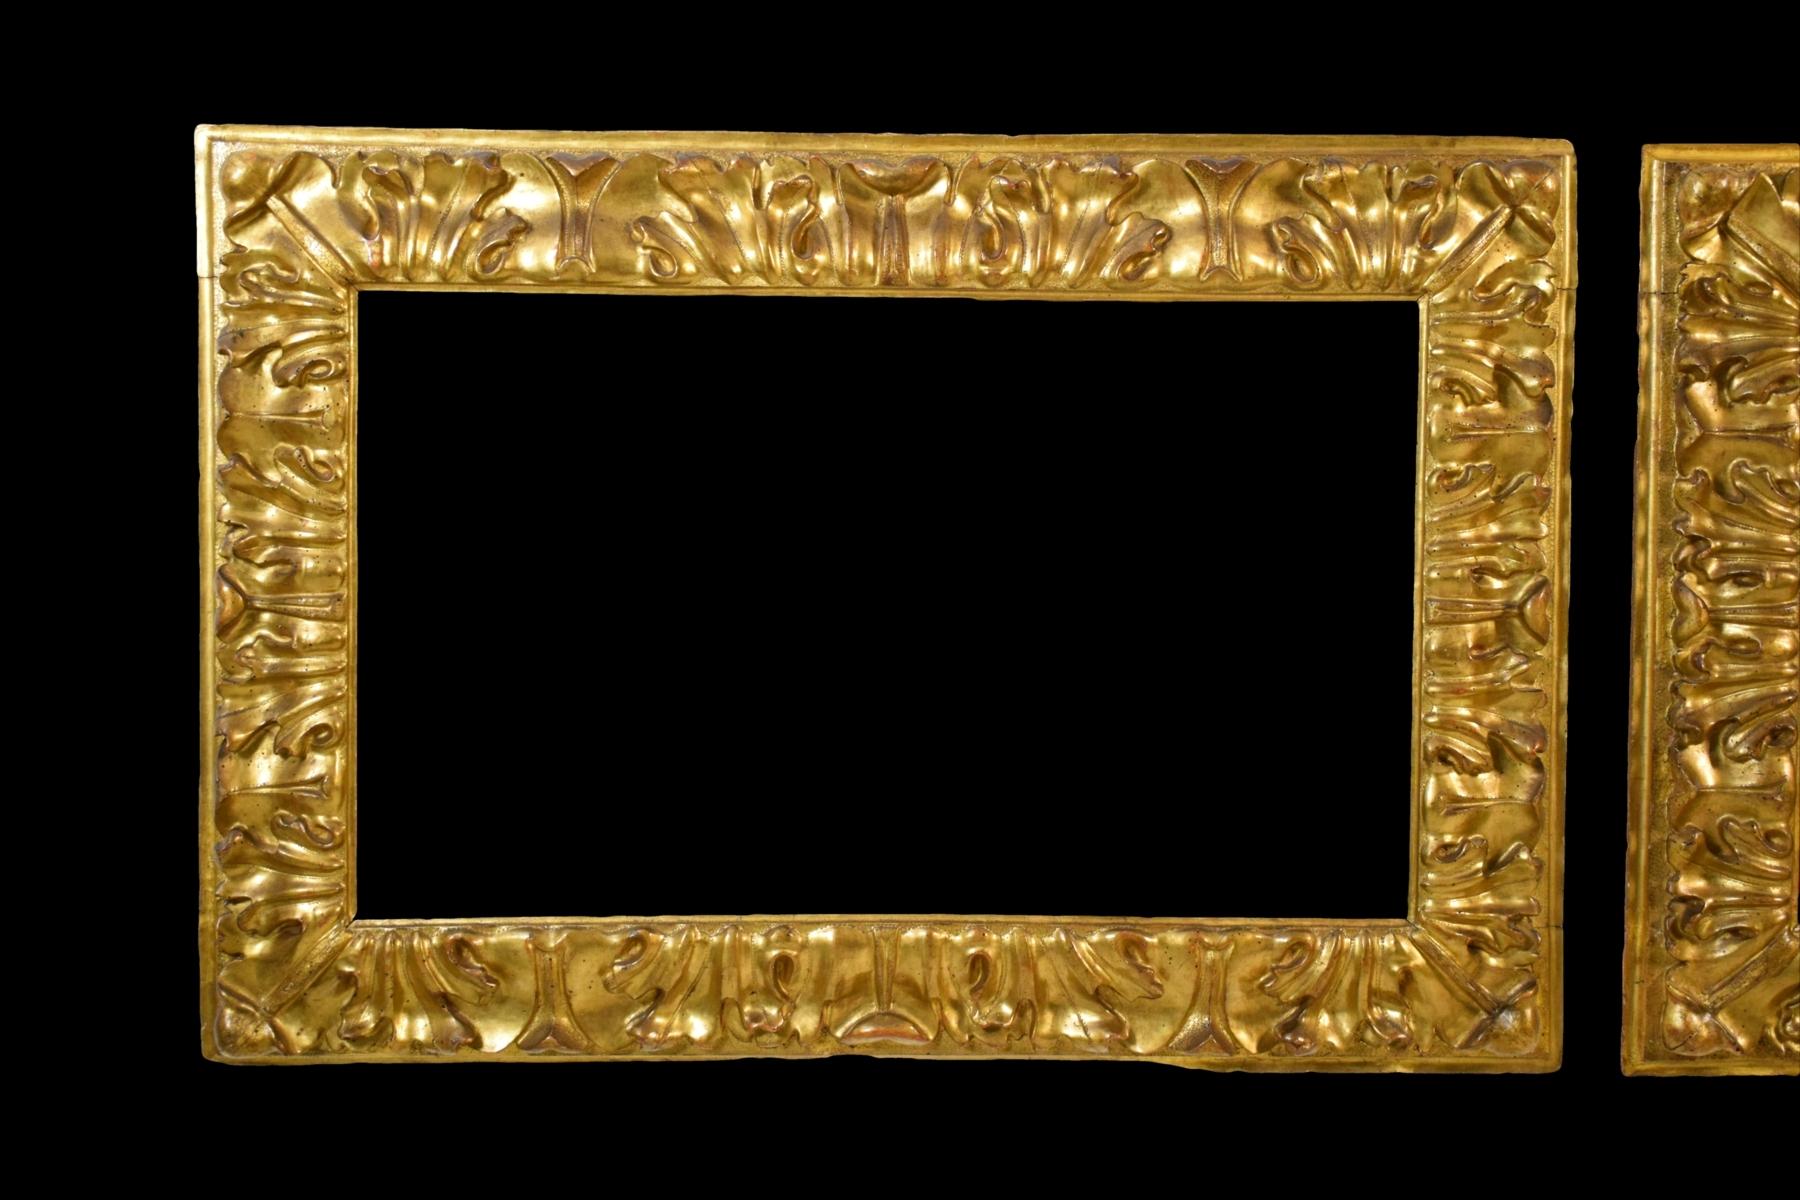 17th century, pair of Italian carved giltwood frames
Total sizes H 86 x W 125 cm; inside space H 56 x W 94.5 cm

This important pair of frames was made in the second half of the 17th century in Bologna, (Italy). The rectangular frames are made of